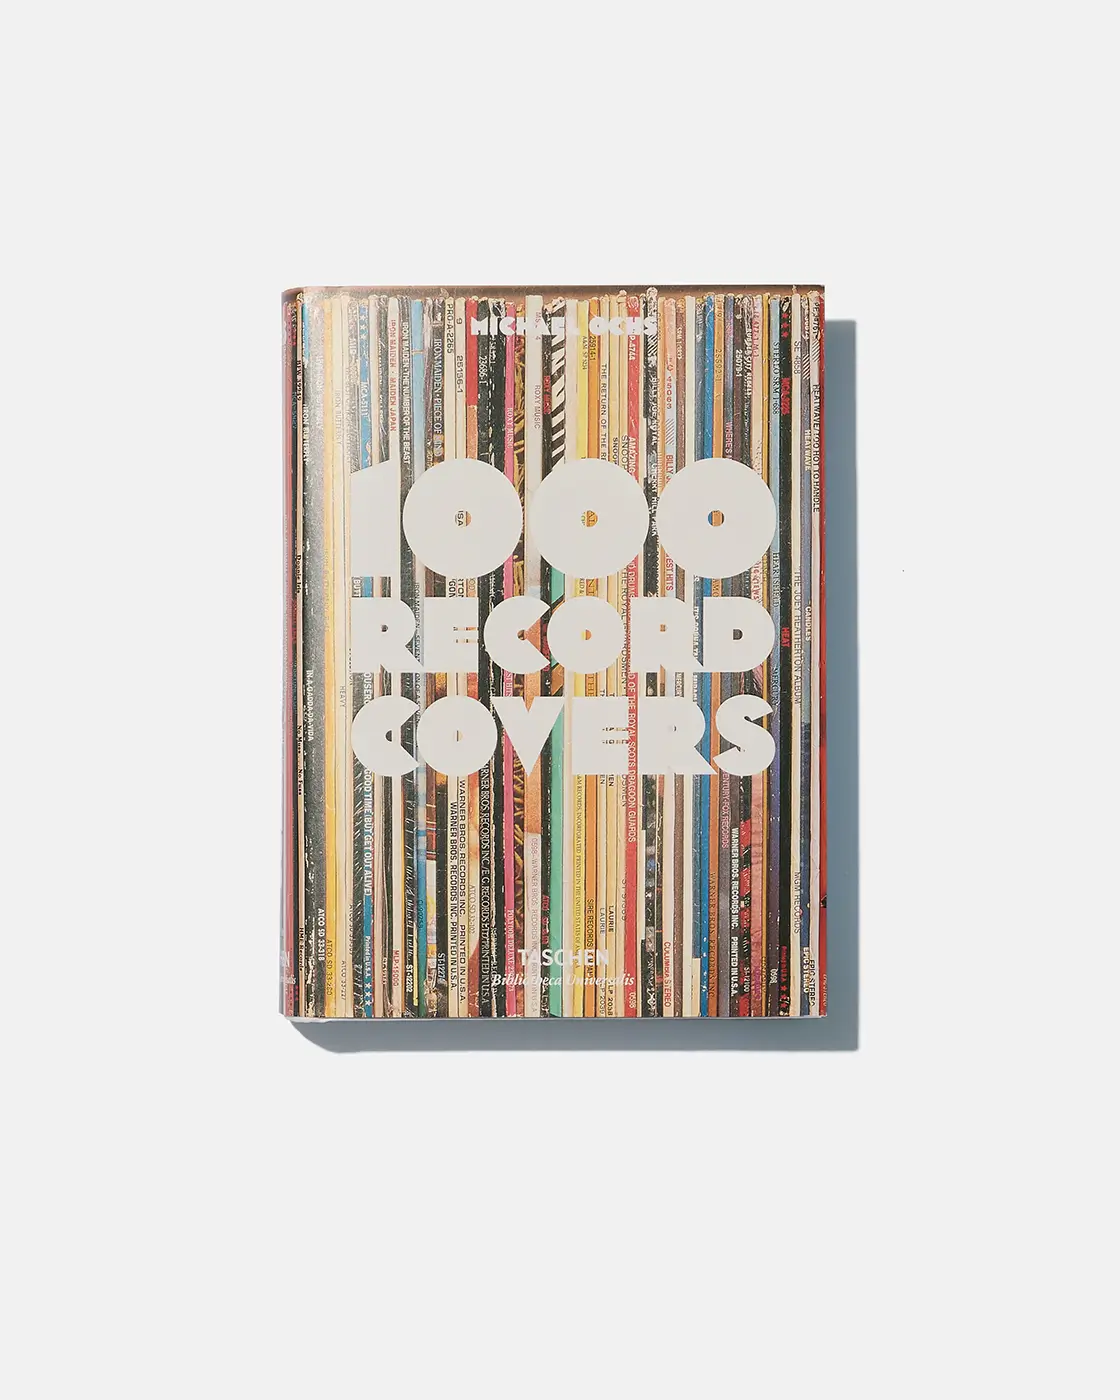 TASCHEN - 1000 Record Covers